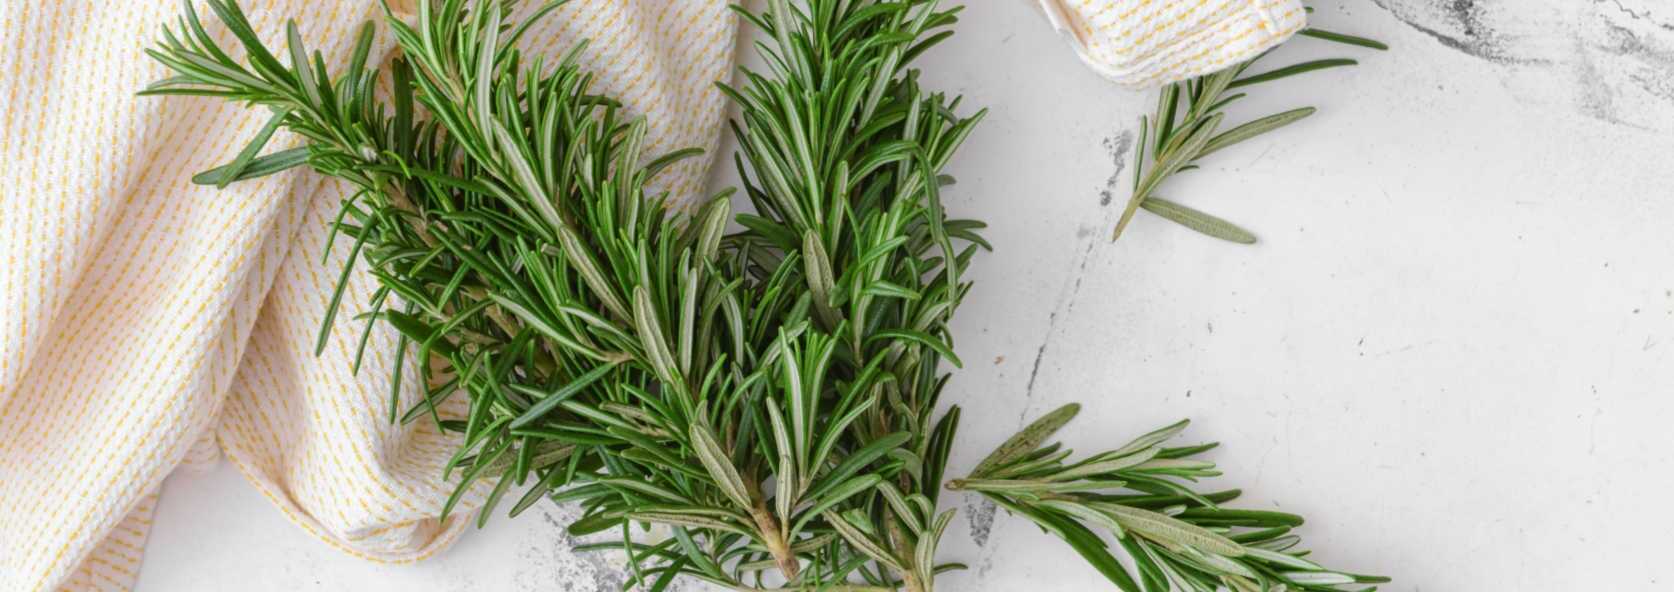 Rosemary_white_background_and_towel_bd440ea2-ad43-41f7-ab5e-627411461c37.jpg